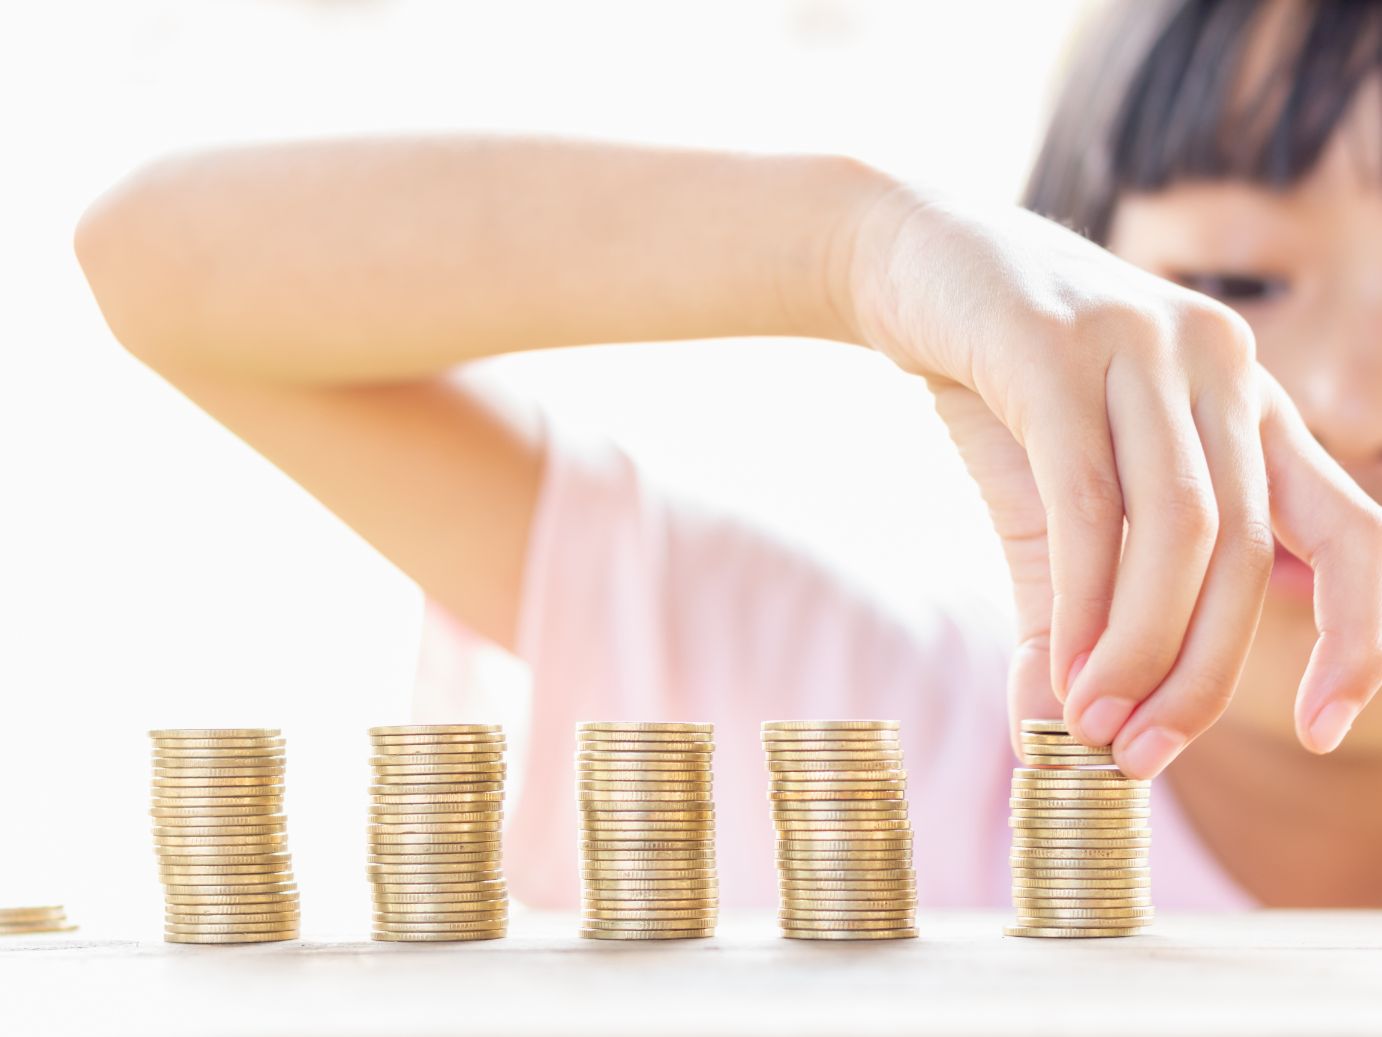 Child stacking coins indicating a basic understanding about money and budgeting.